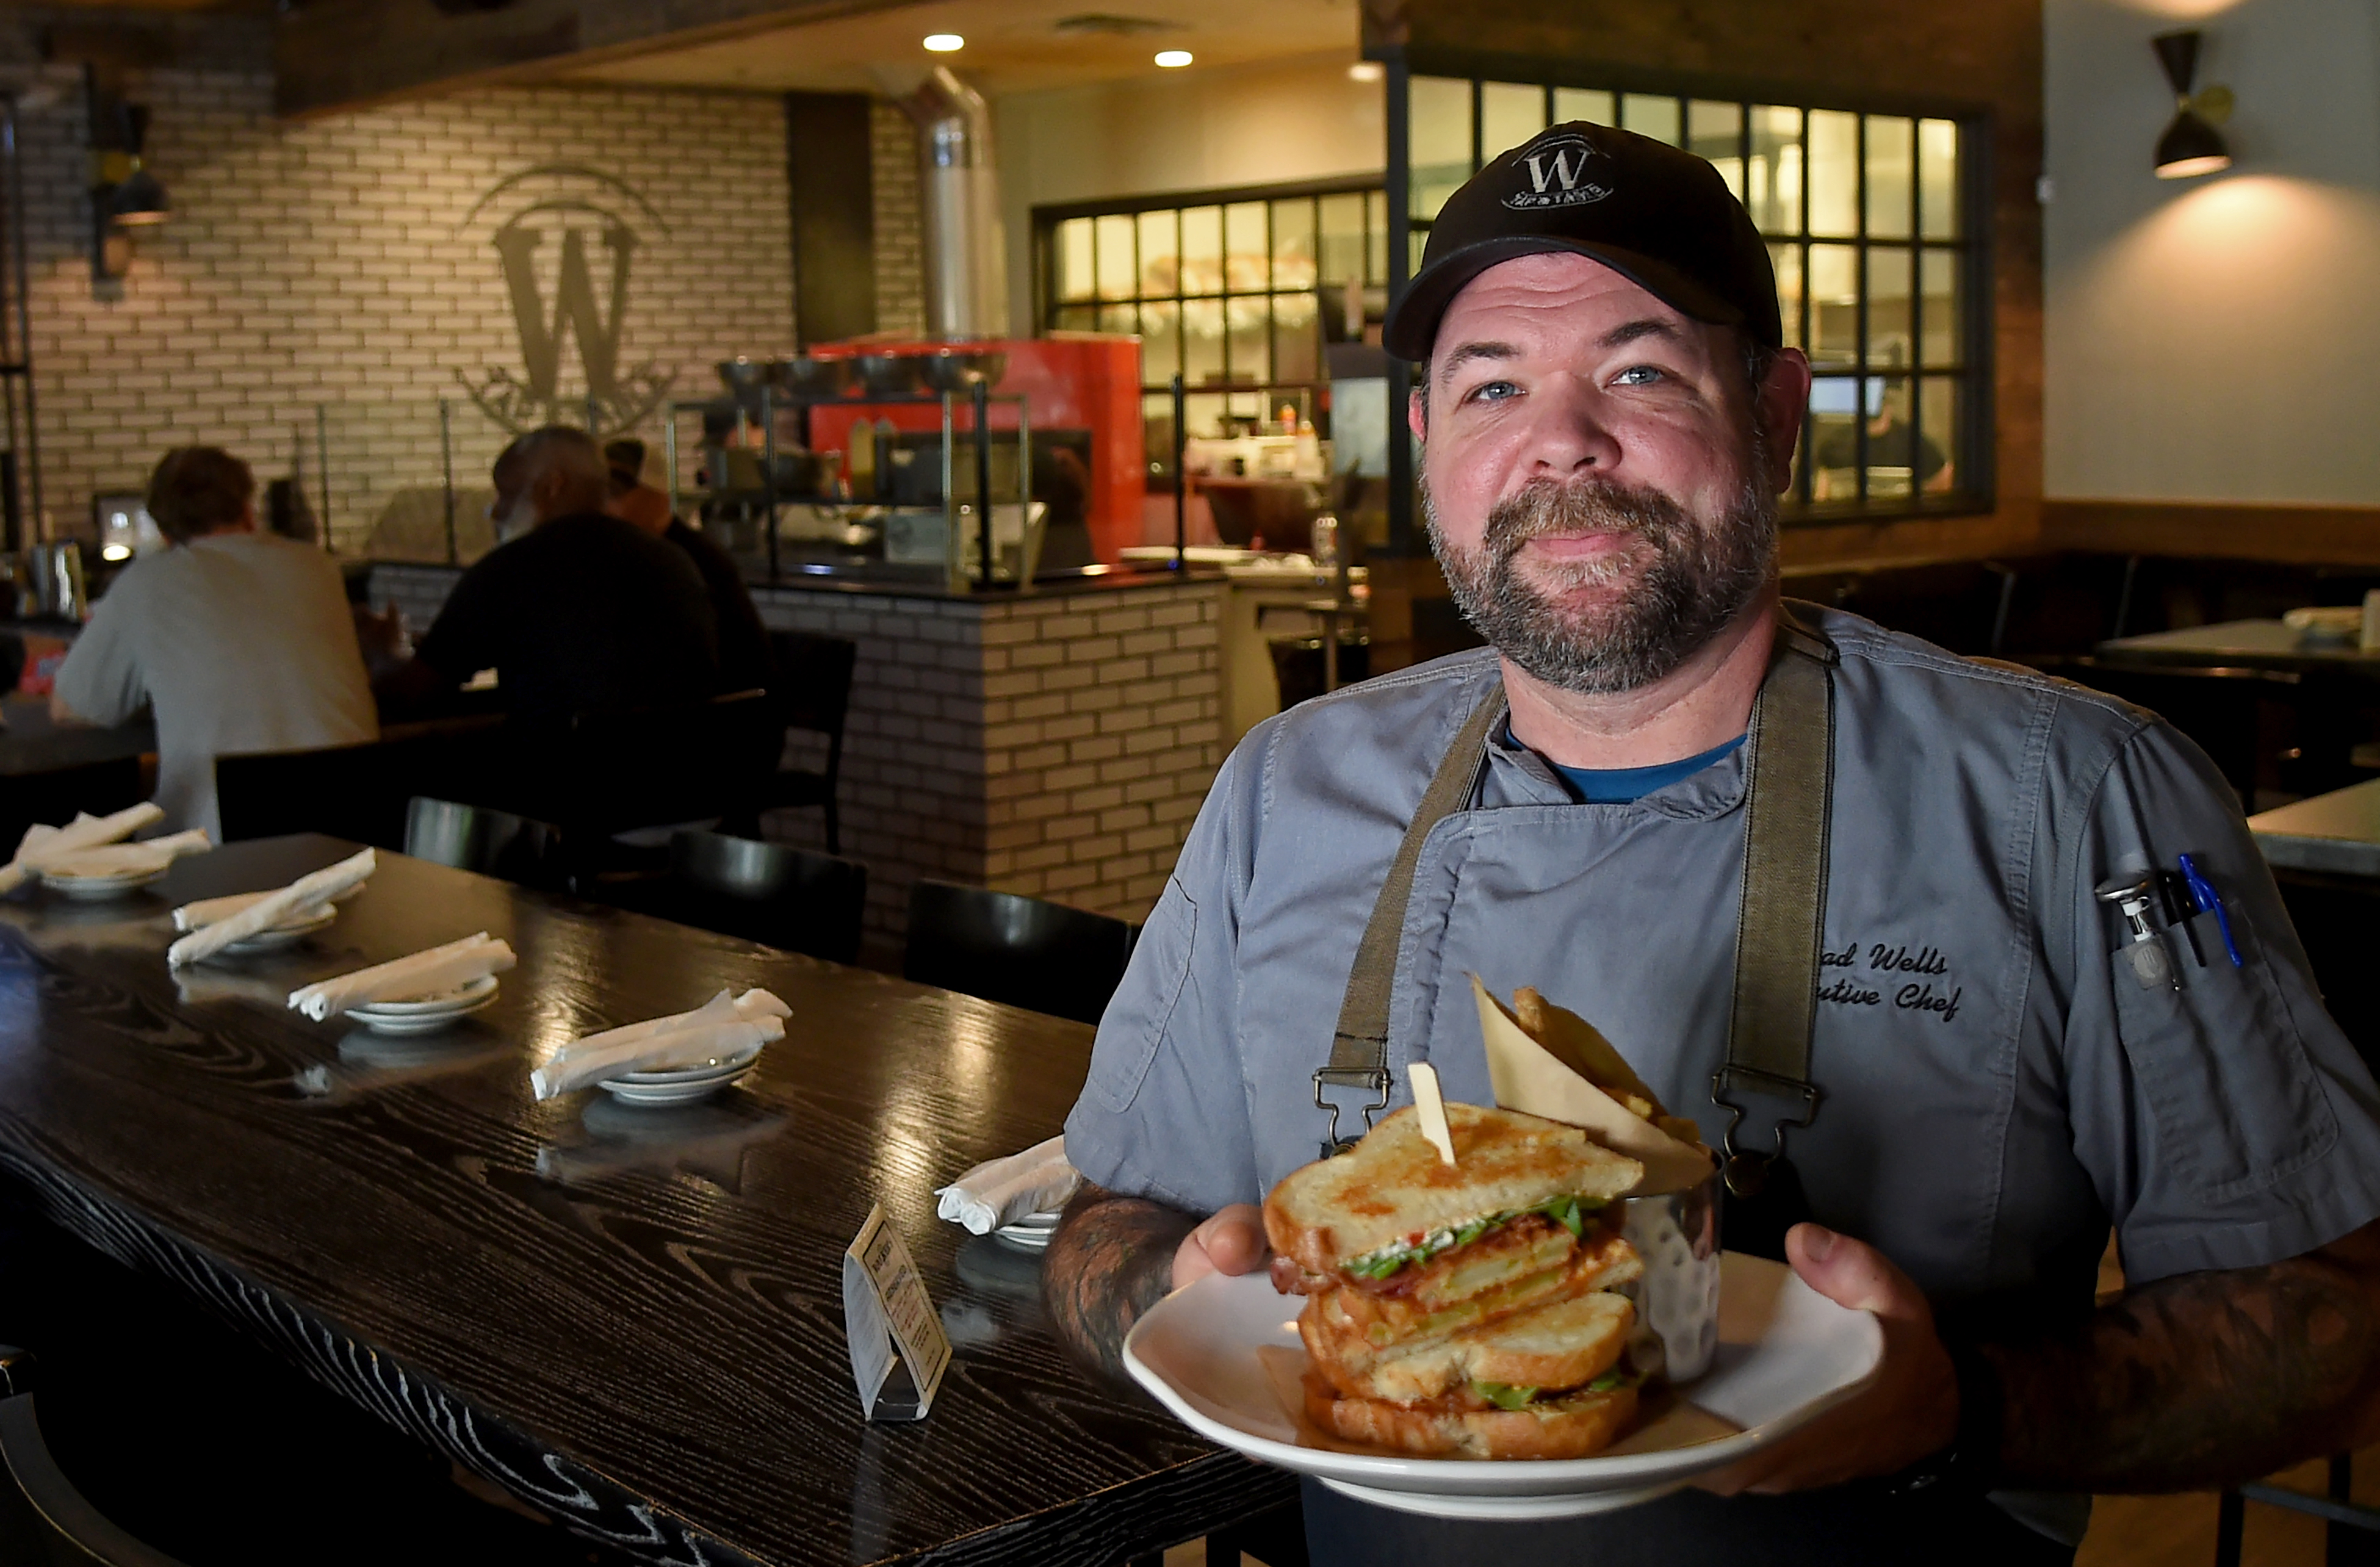 Chef Chad Wells, executive chef at Walker's Tap and Table, has been named best chef in Howard County. Here, he holds one of his creations: the Route 97 BLT with bacon, fried green tomatoes, habanero honey, arugula, and pimiento cheese on sourdough bread. (Barbara Haddock Taylor/Staff)